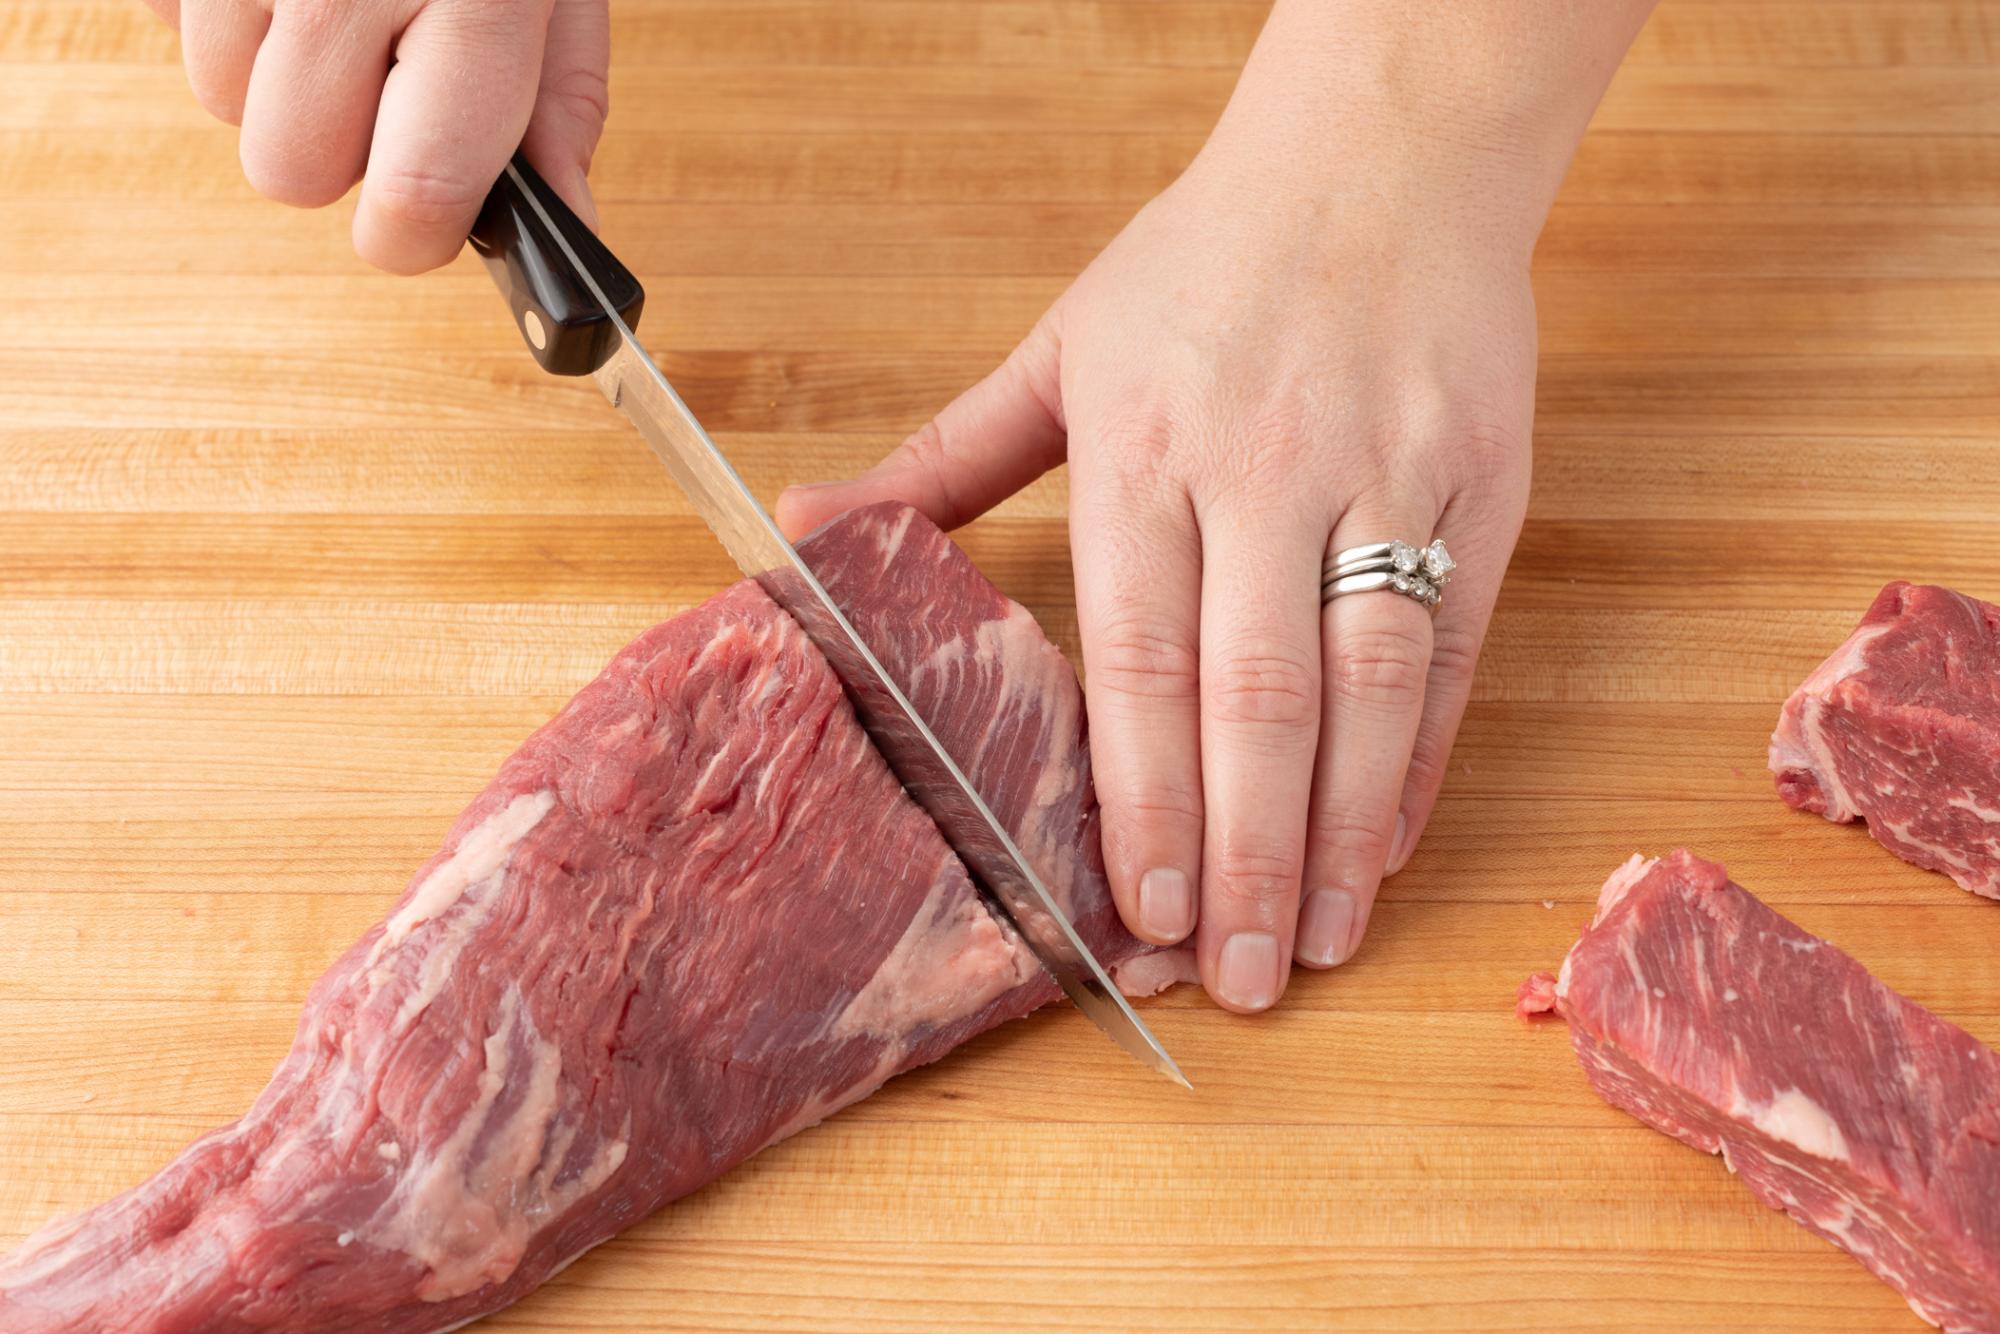 How Can You Pick the Best Knives for Cutting Raw Meat